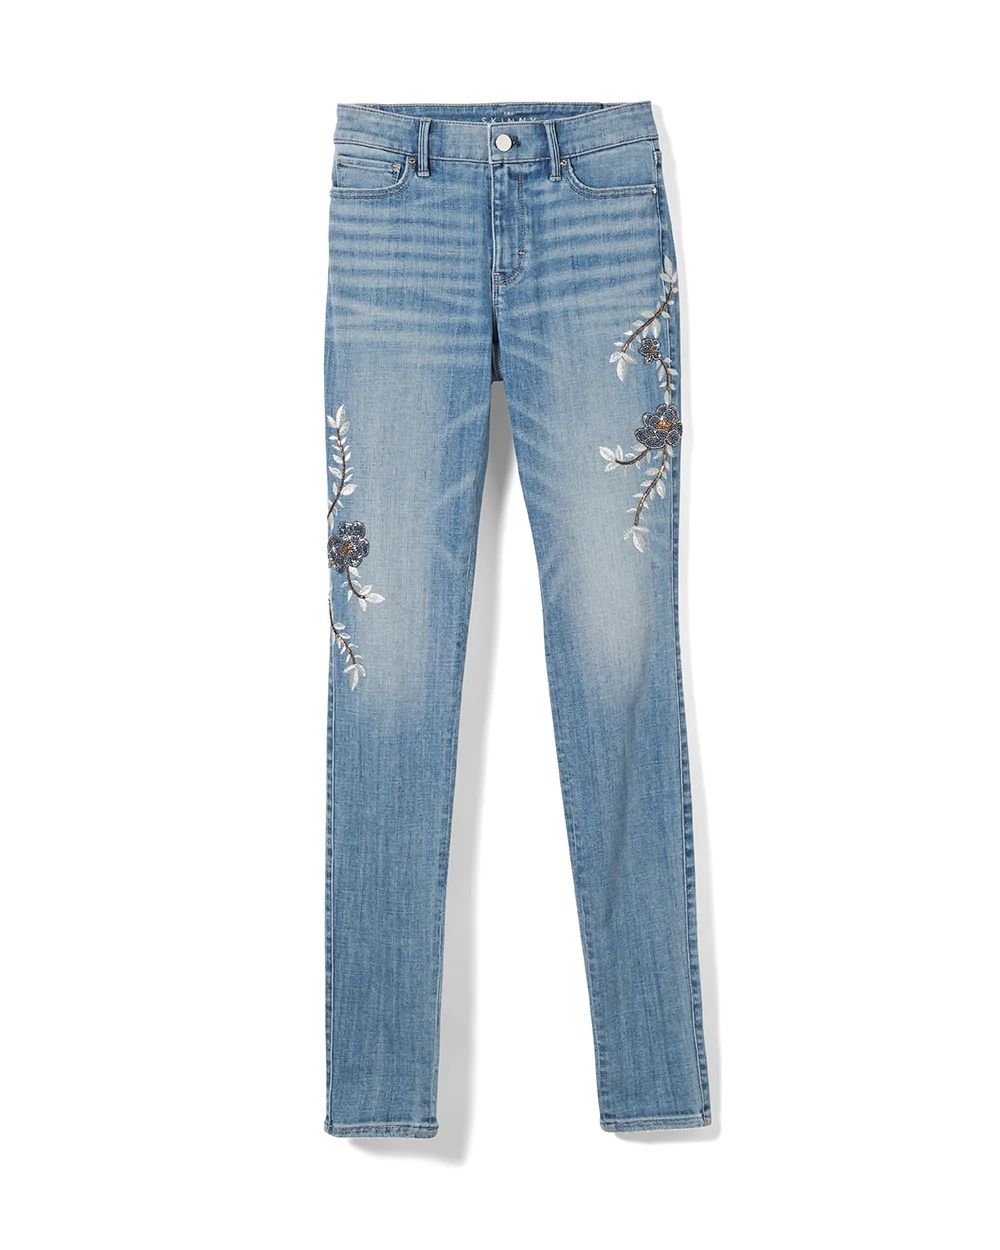 Petite Mid-Rise Everyday Soft Denim™ Floral Embroidered Skinny Jeans click to view larger image.